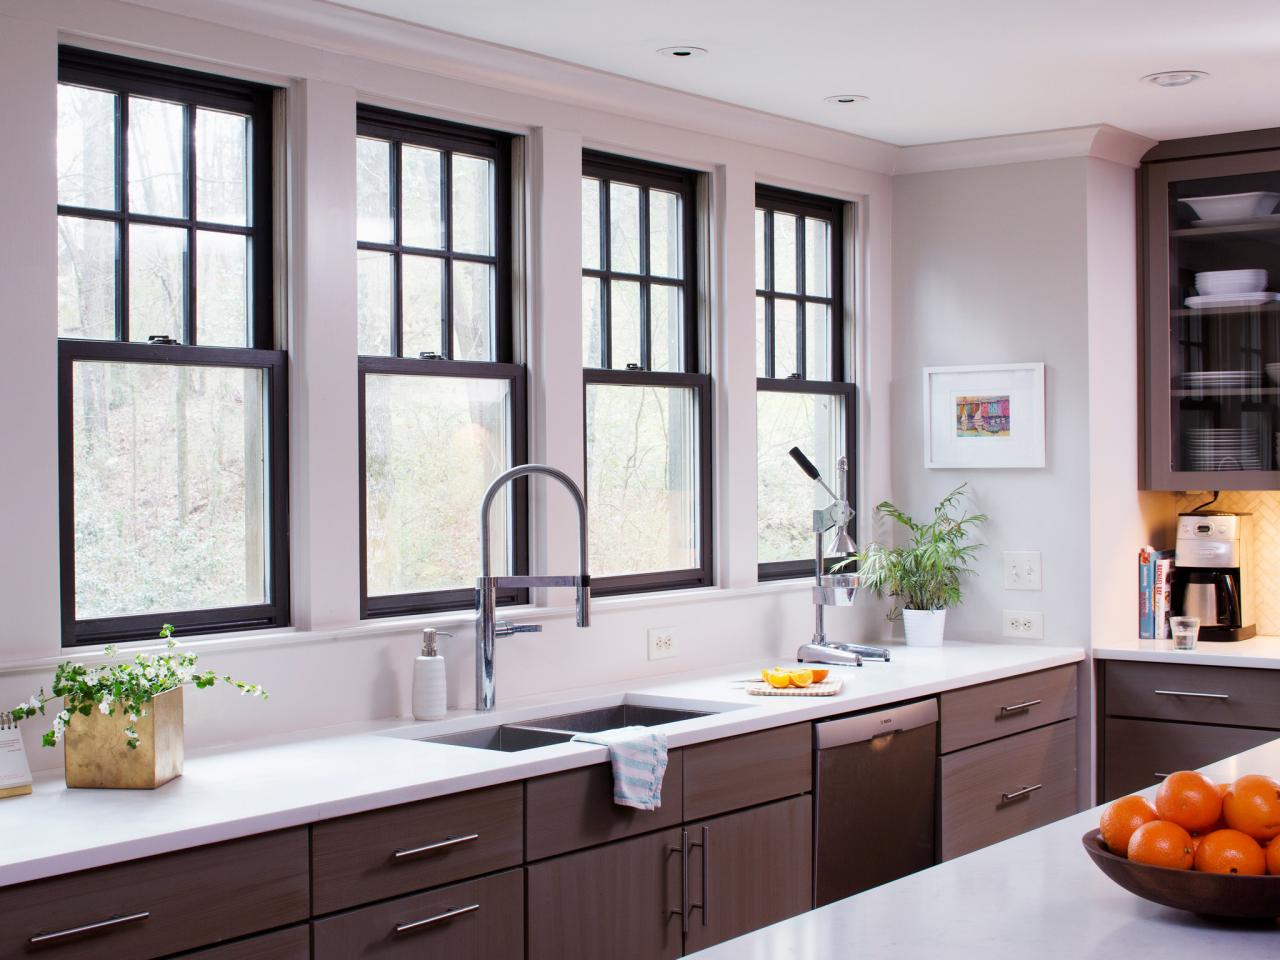 Need New Kitchen Windows? Here's How To Maximize Energy Efficiency